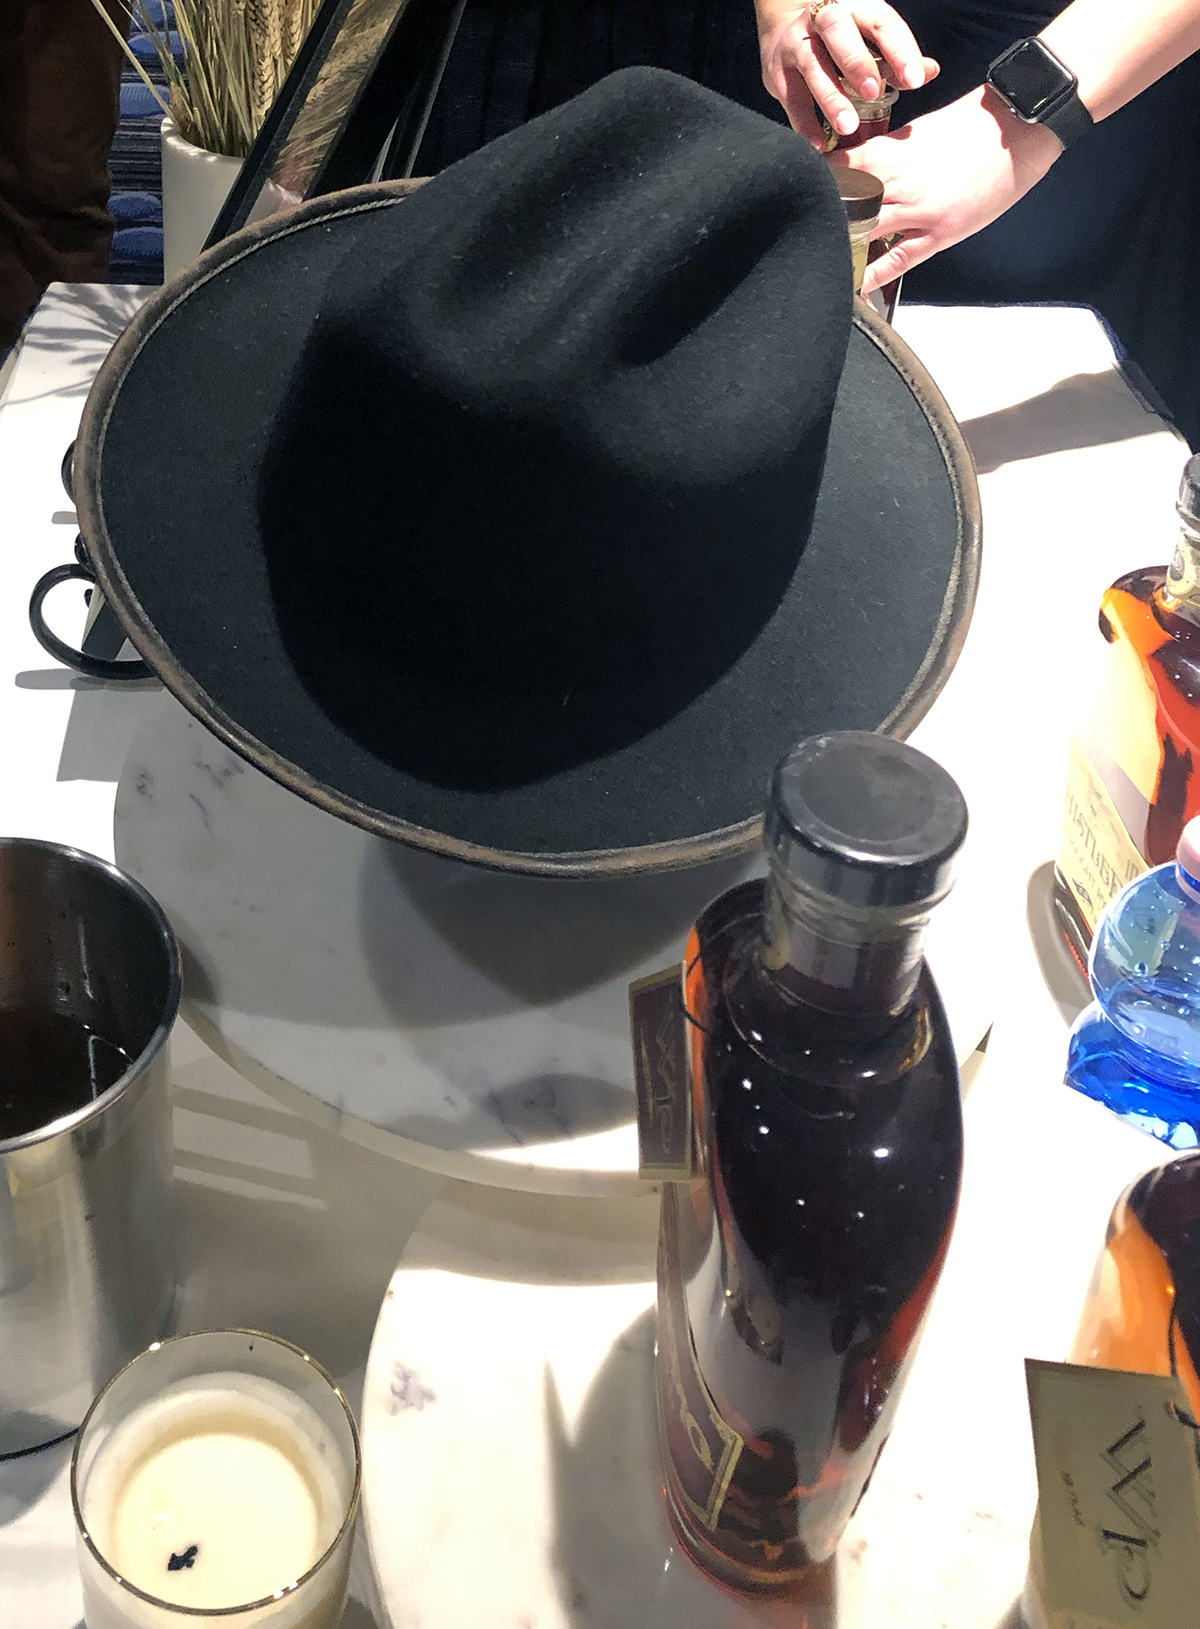 One of Dave Pickerell's hats displayed as a tribute to the late distiller at the WhistlePig Rye stand during WhiskyFest December 4, 2018 in New York City. Photo ©2018, Mark Gillespie/CaskStrength Media.